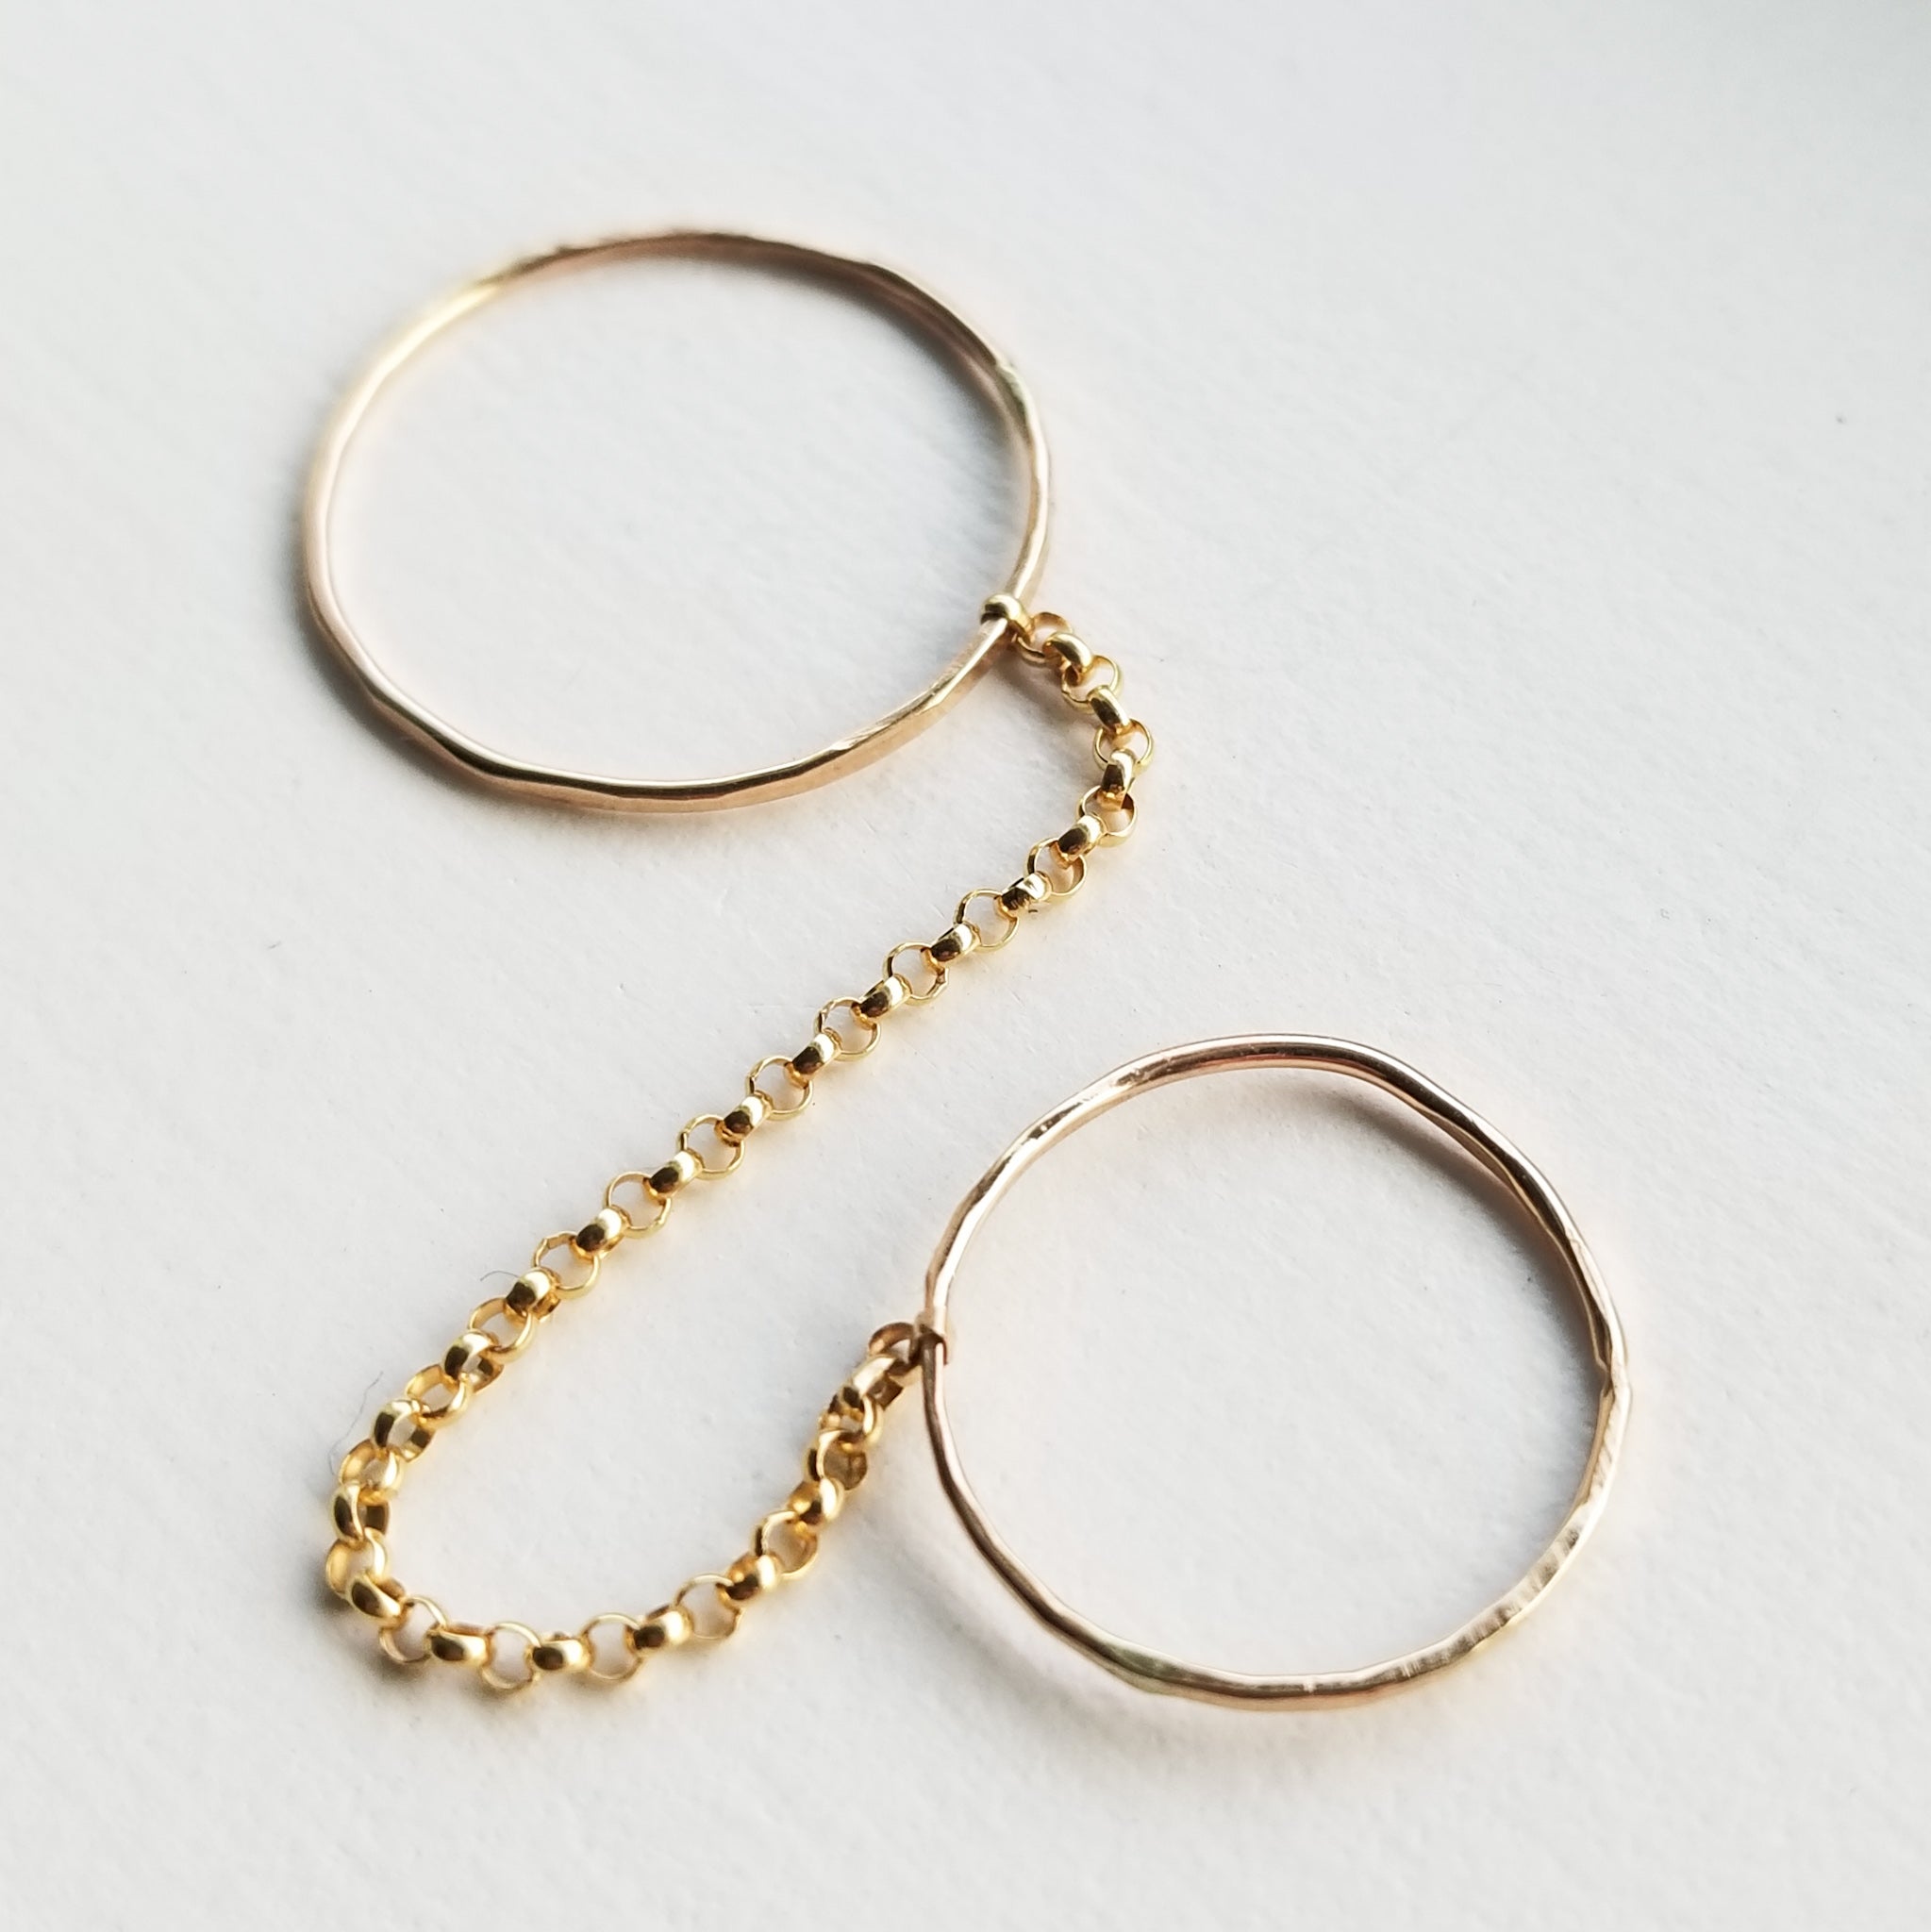 a set of two gold simple band rings connected by a gold chain on a white background